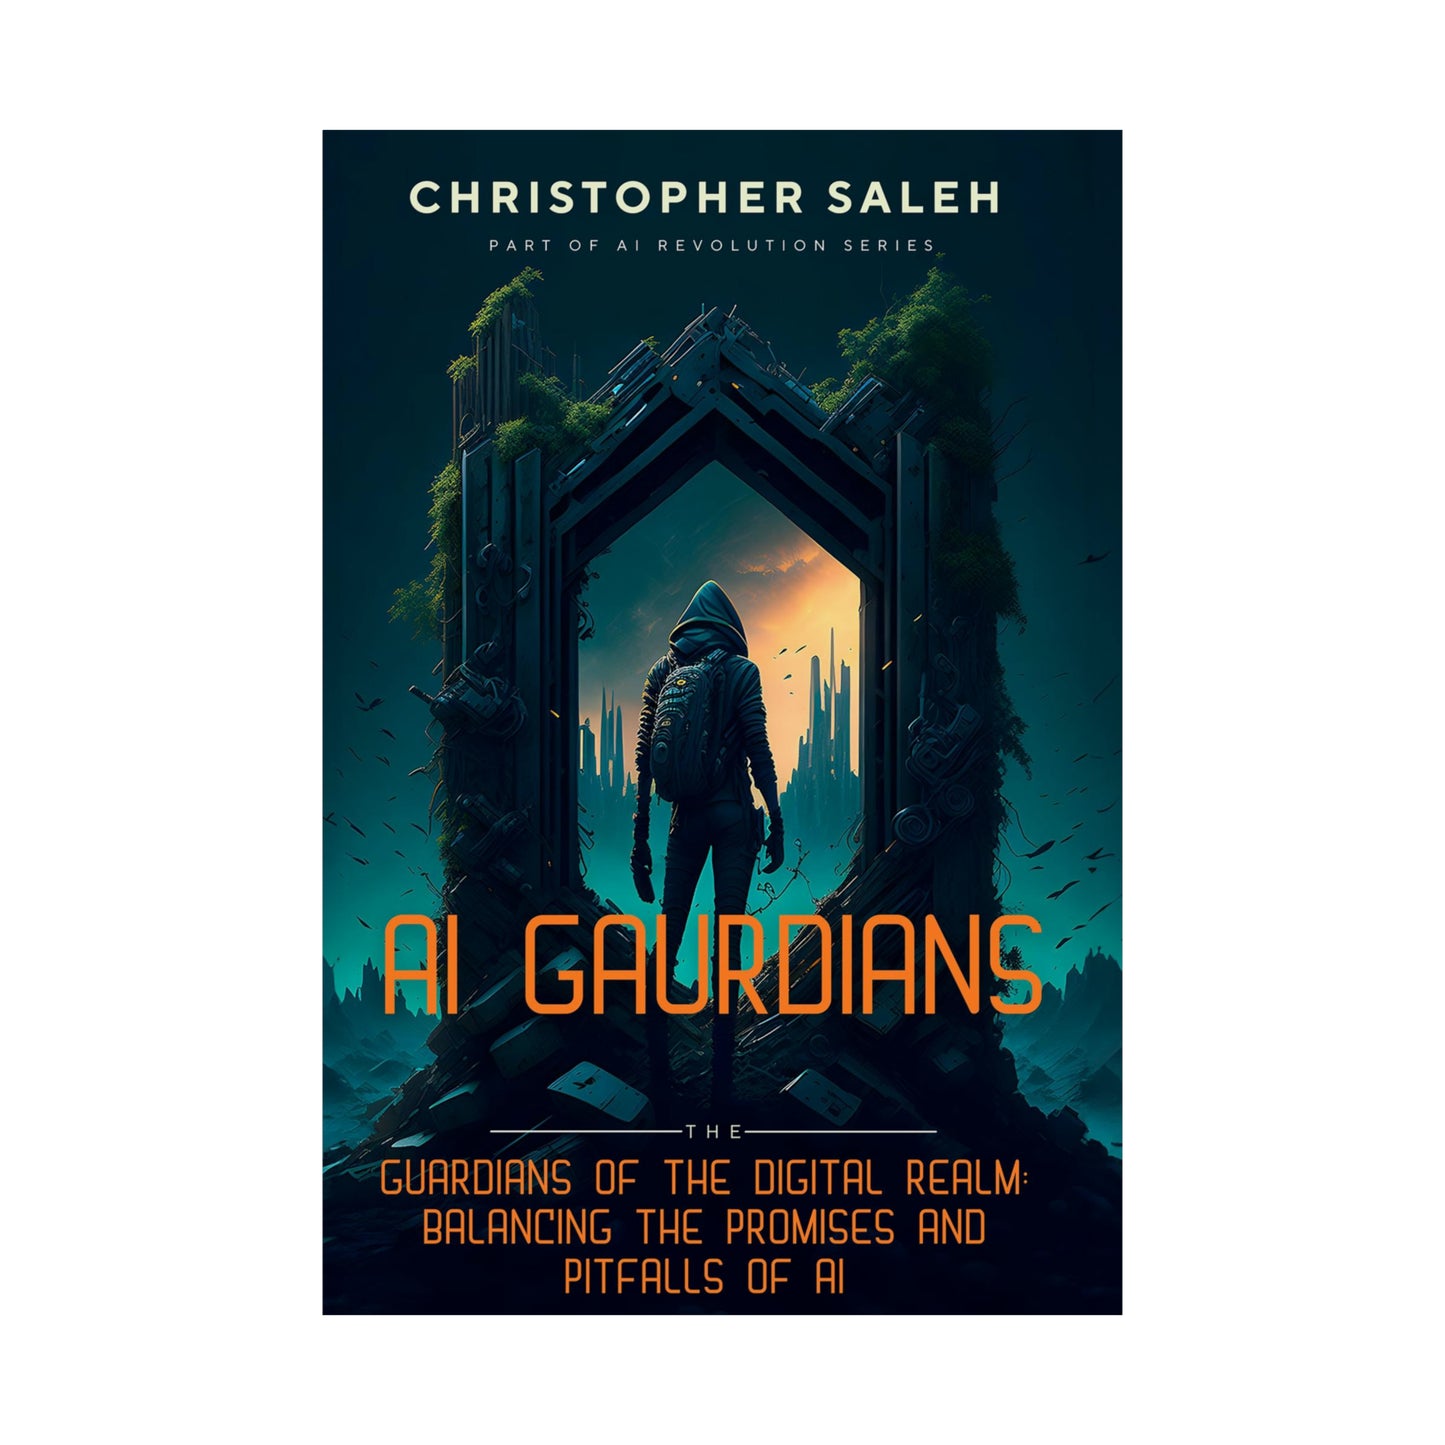 AI Guardians Book Cover By Christopher Saleh - Matte Vertical Posters